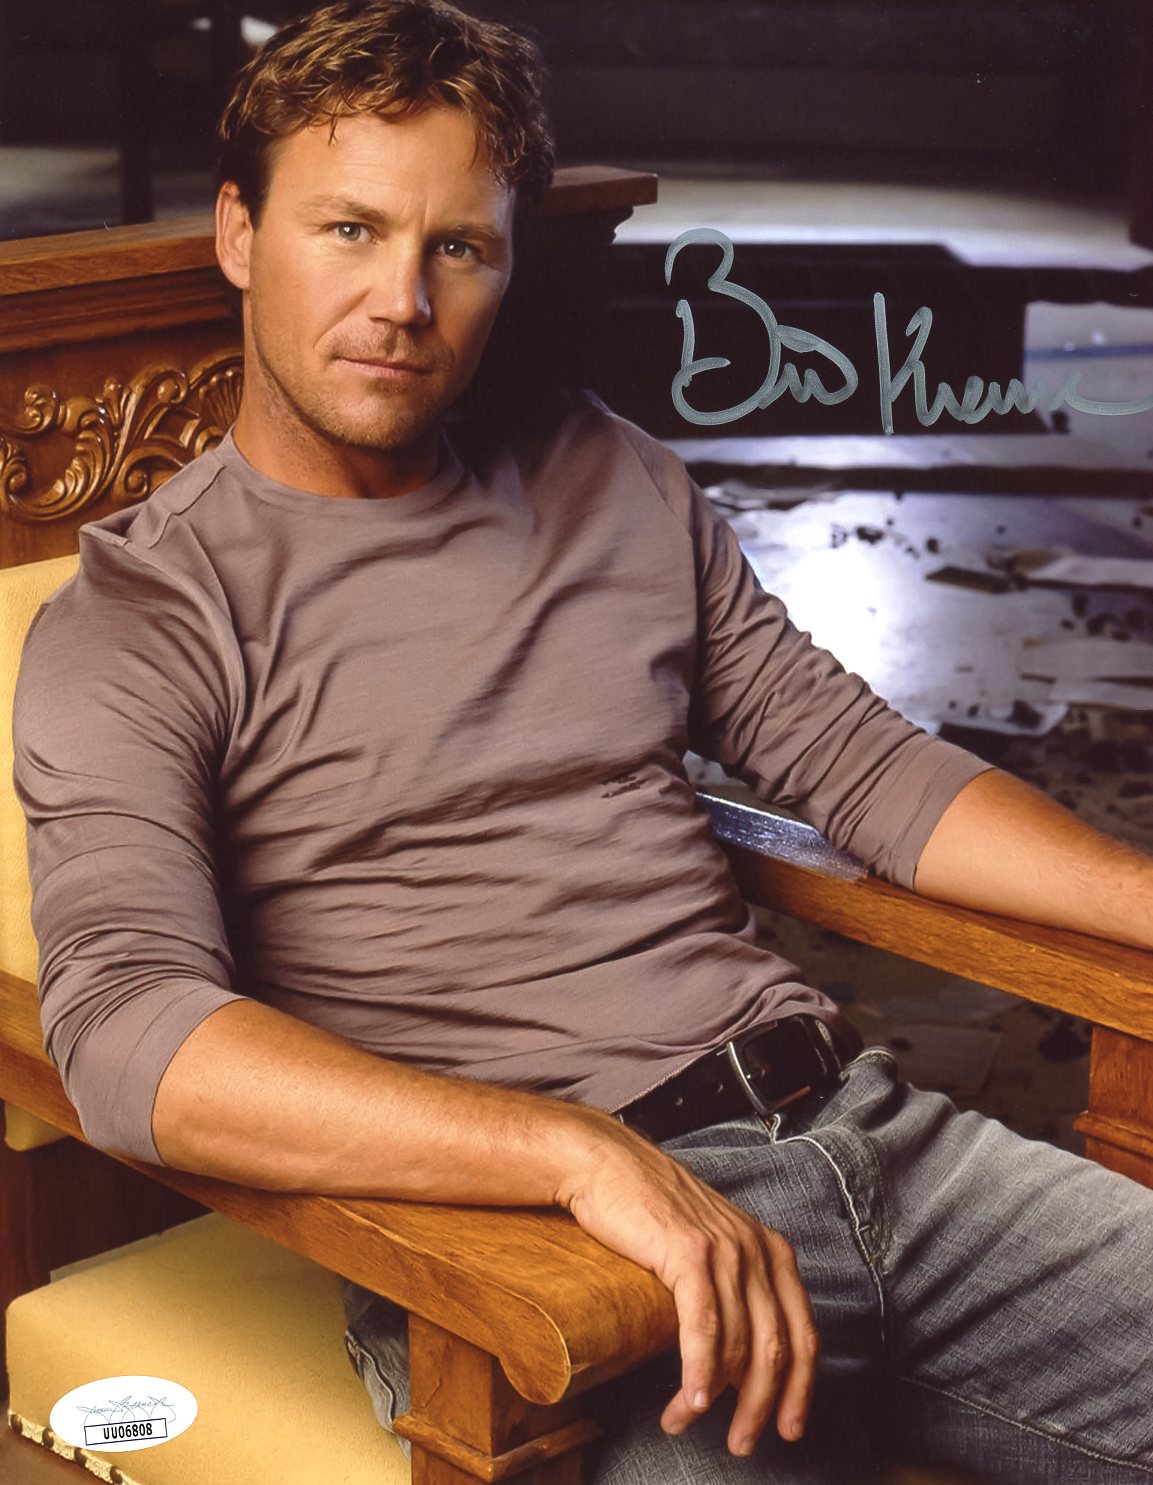 Brian Krause Charmed 8x10 Signed Photo JSA Certified Autograph GalaxyCon